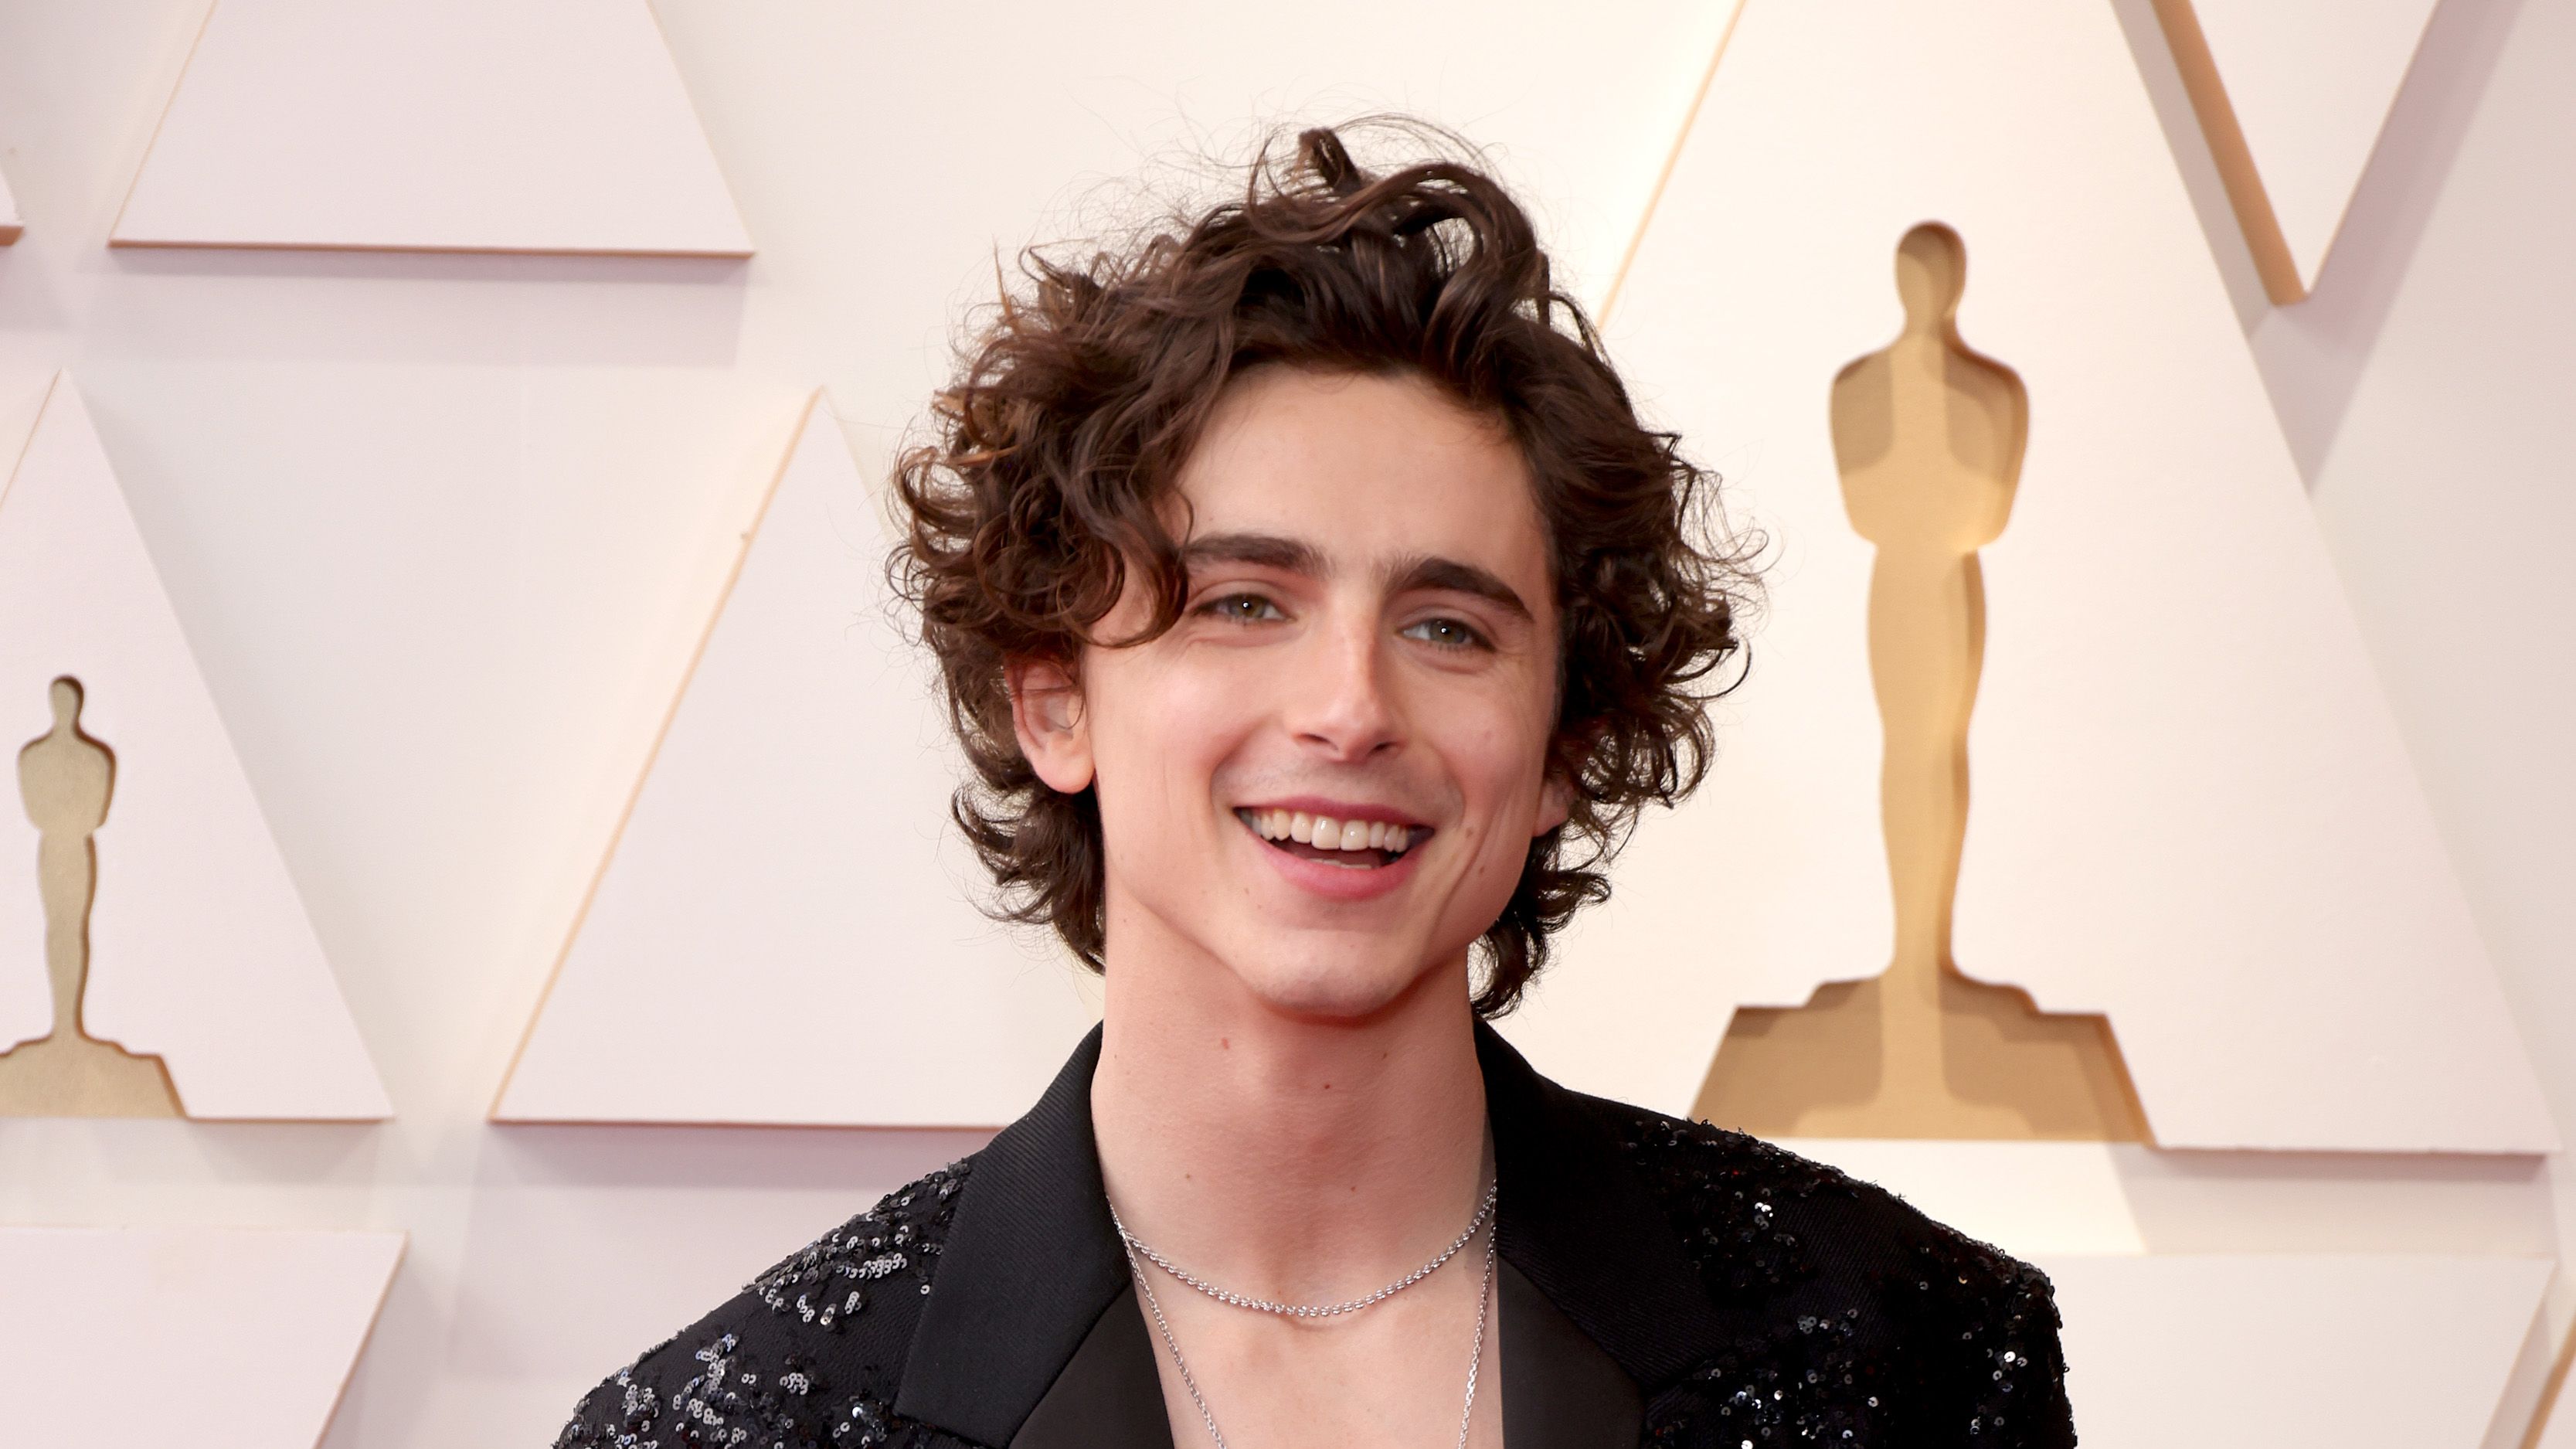 Timothée Chalamet Will Play a Young Willy Wonka In A New Origin